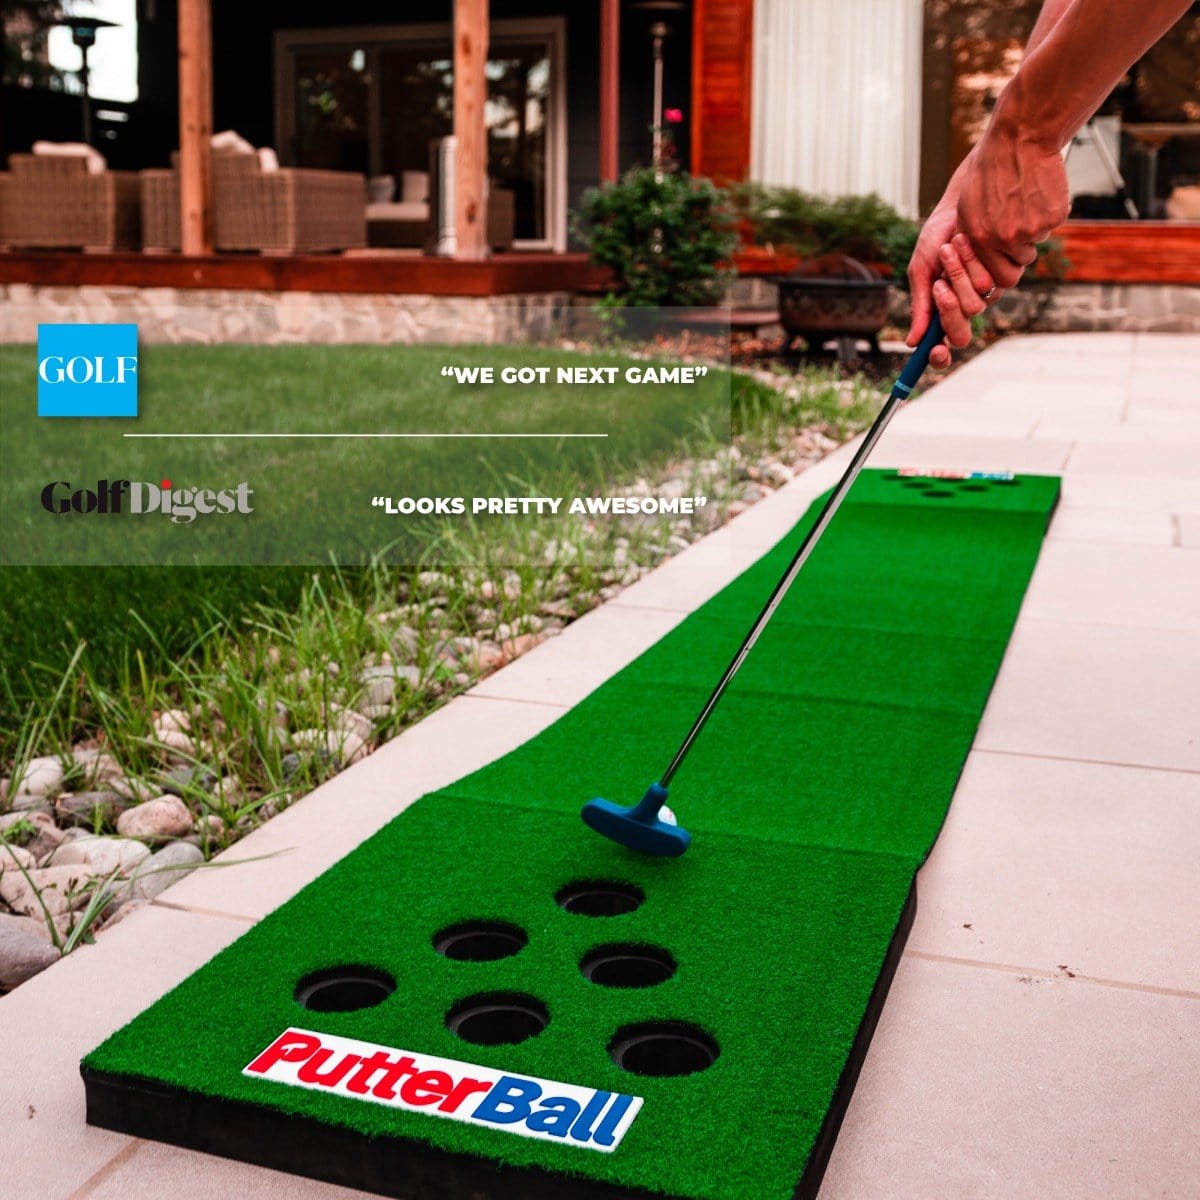 Practice Putting at home or office with portable putting green by Putterball